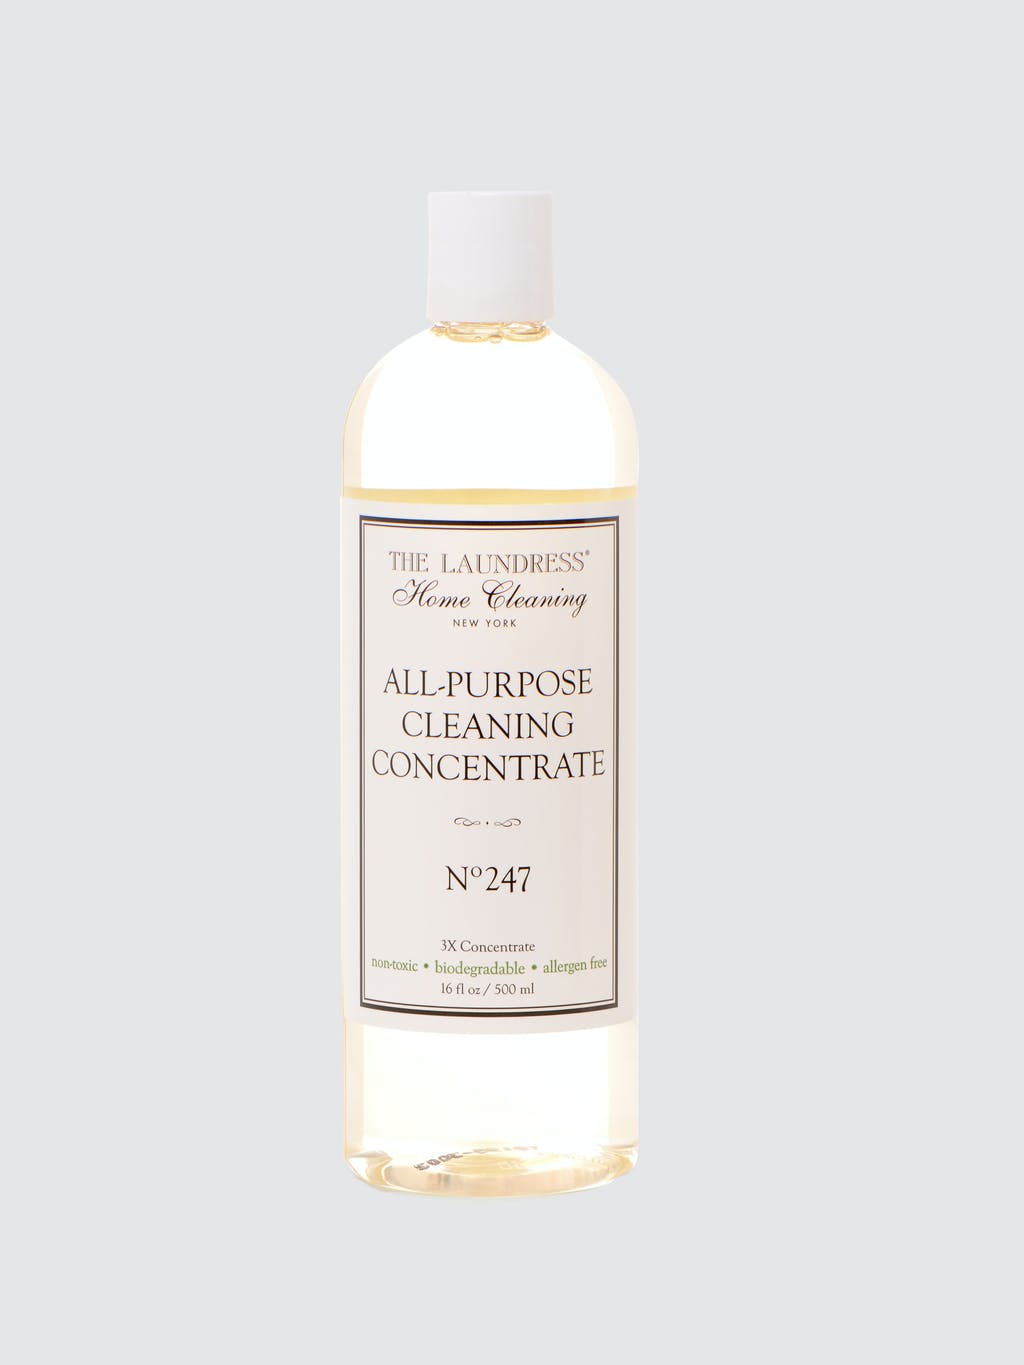 All-Purpose Cleaning Concentrate - No247